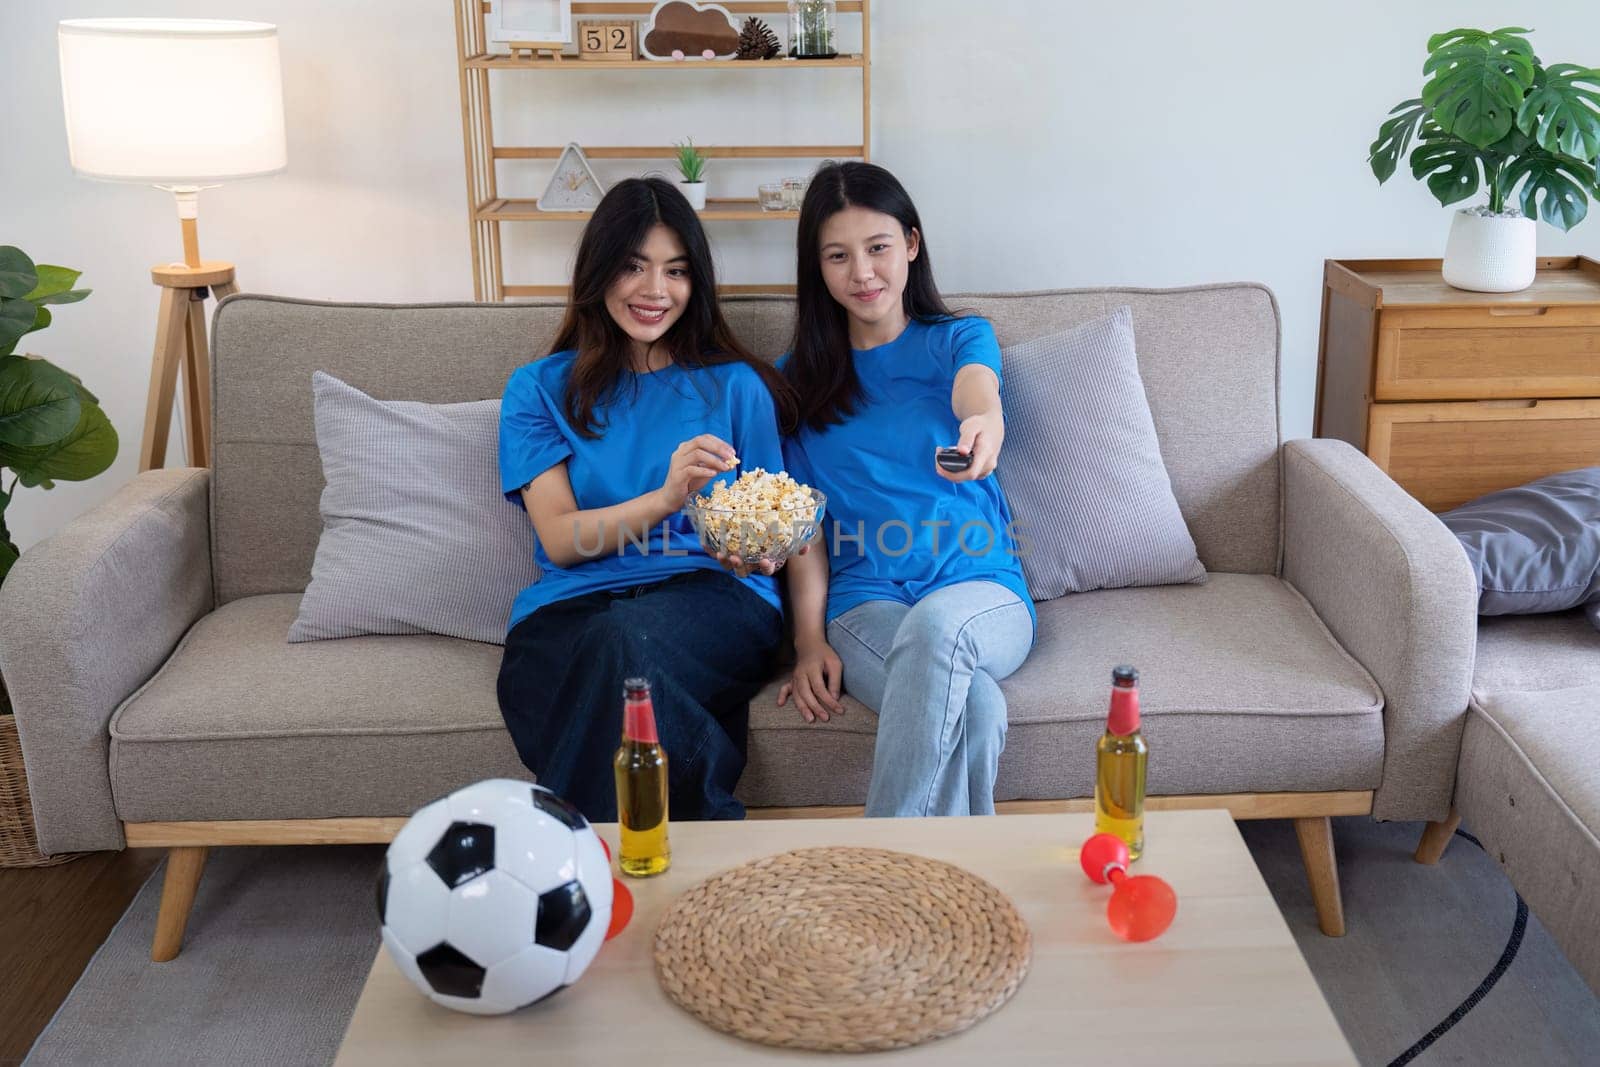 Lesbian couple cheering for Euro football at home with snacks and drinks. Concept of LGBTQ pride, sports enthusiasm, and domestic leisure by nateemee